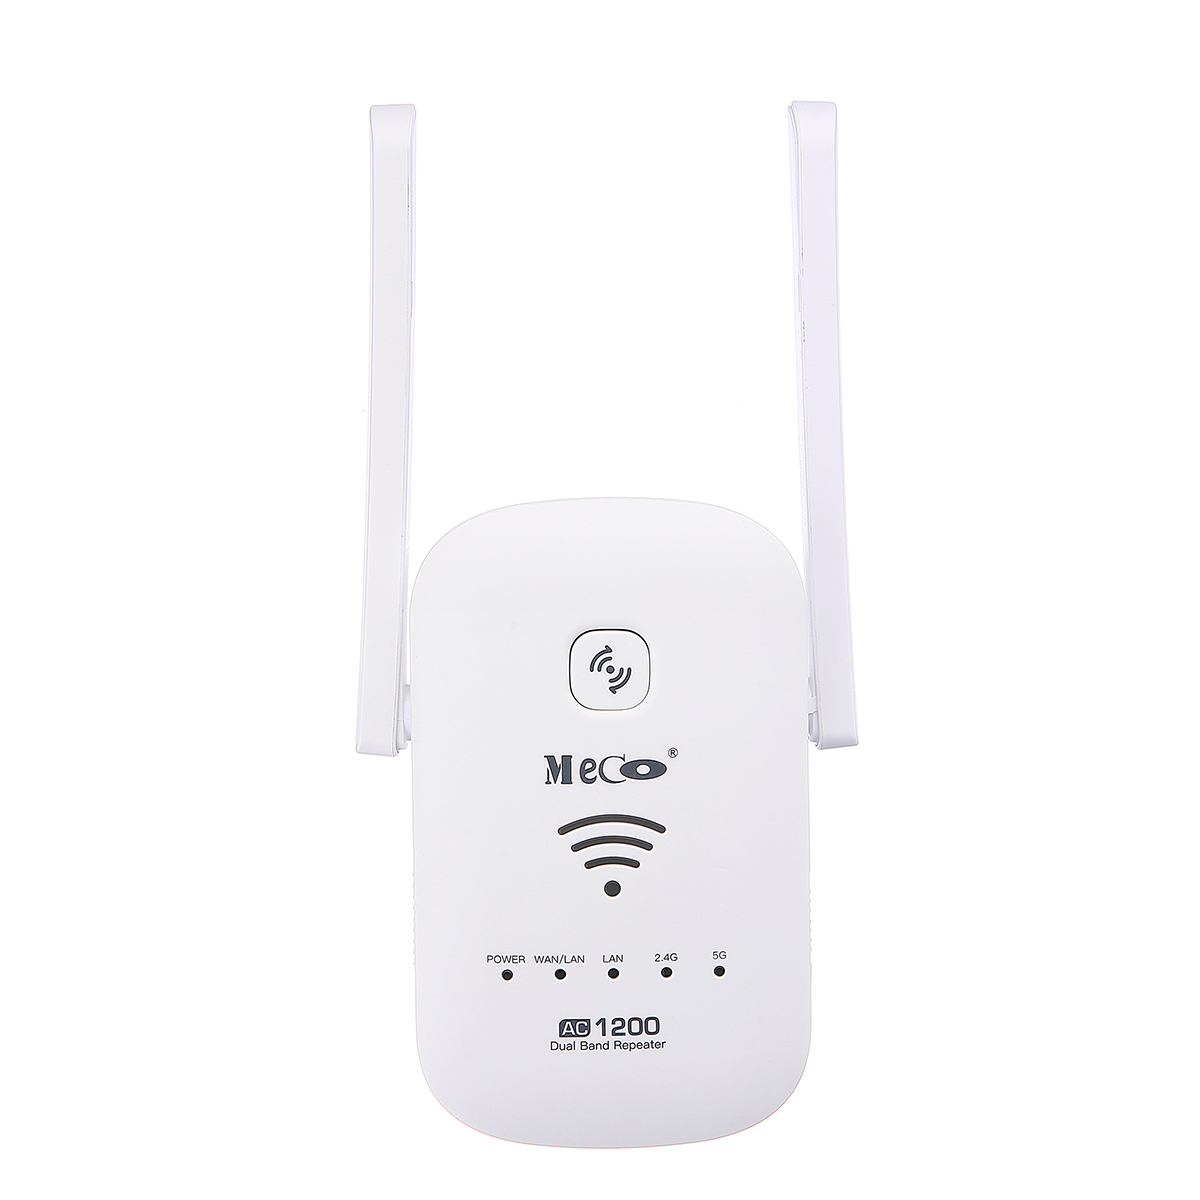 Find MECO ELEVERDE AC1200 WiFi Repeater Dual Band 2 4G 5G 1200M Repeater/Router/AP Mode Switch WPS WiFi Range Extender WiFi Wireless Amplifier ME AC50 for Sale on Gipsybee.com with cryptocurrencies